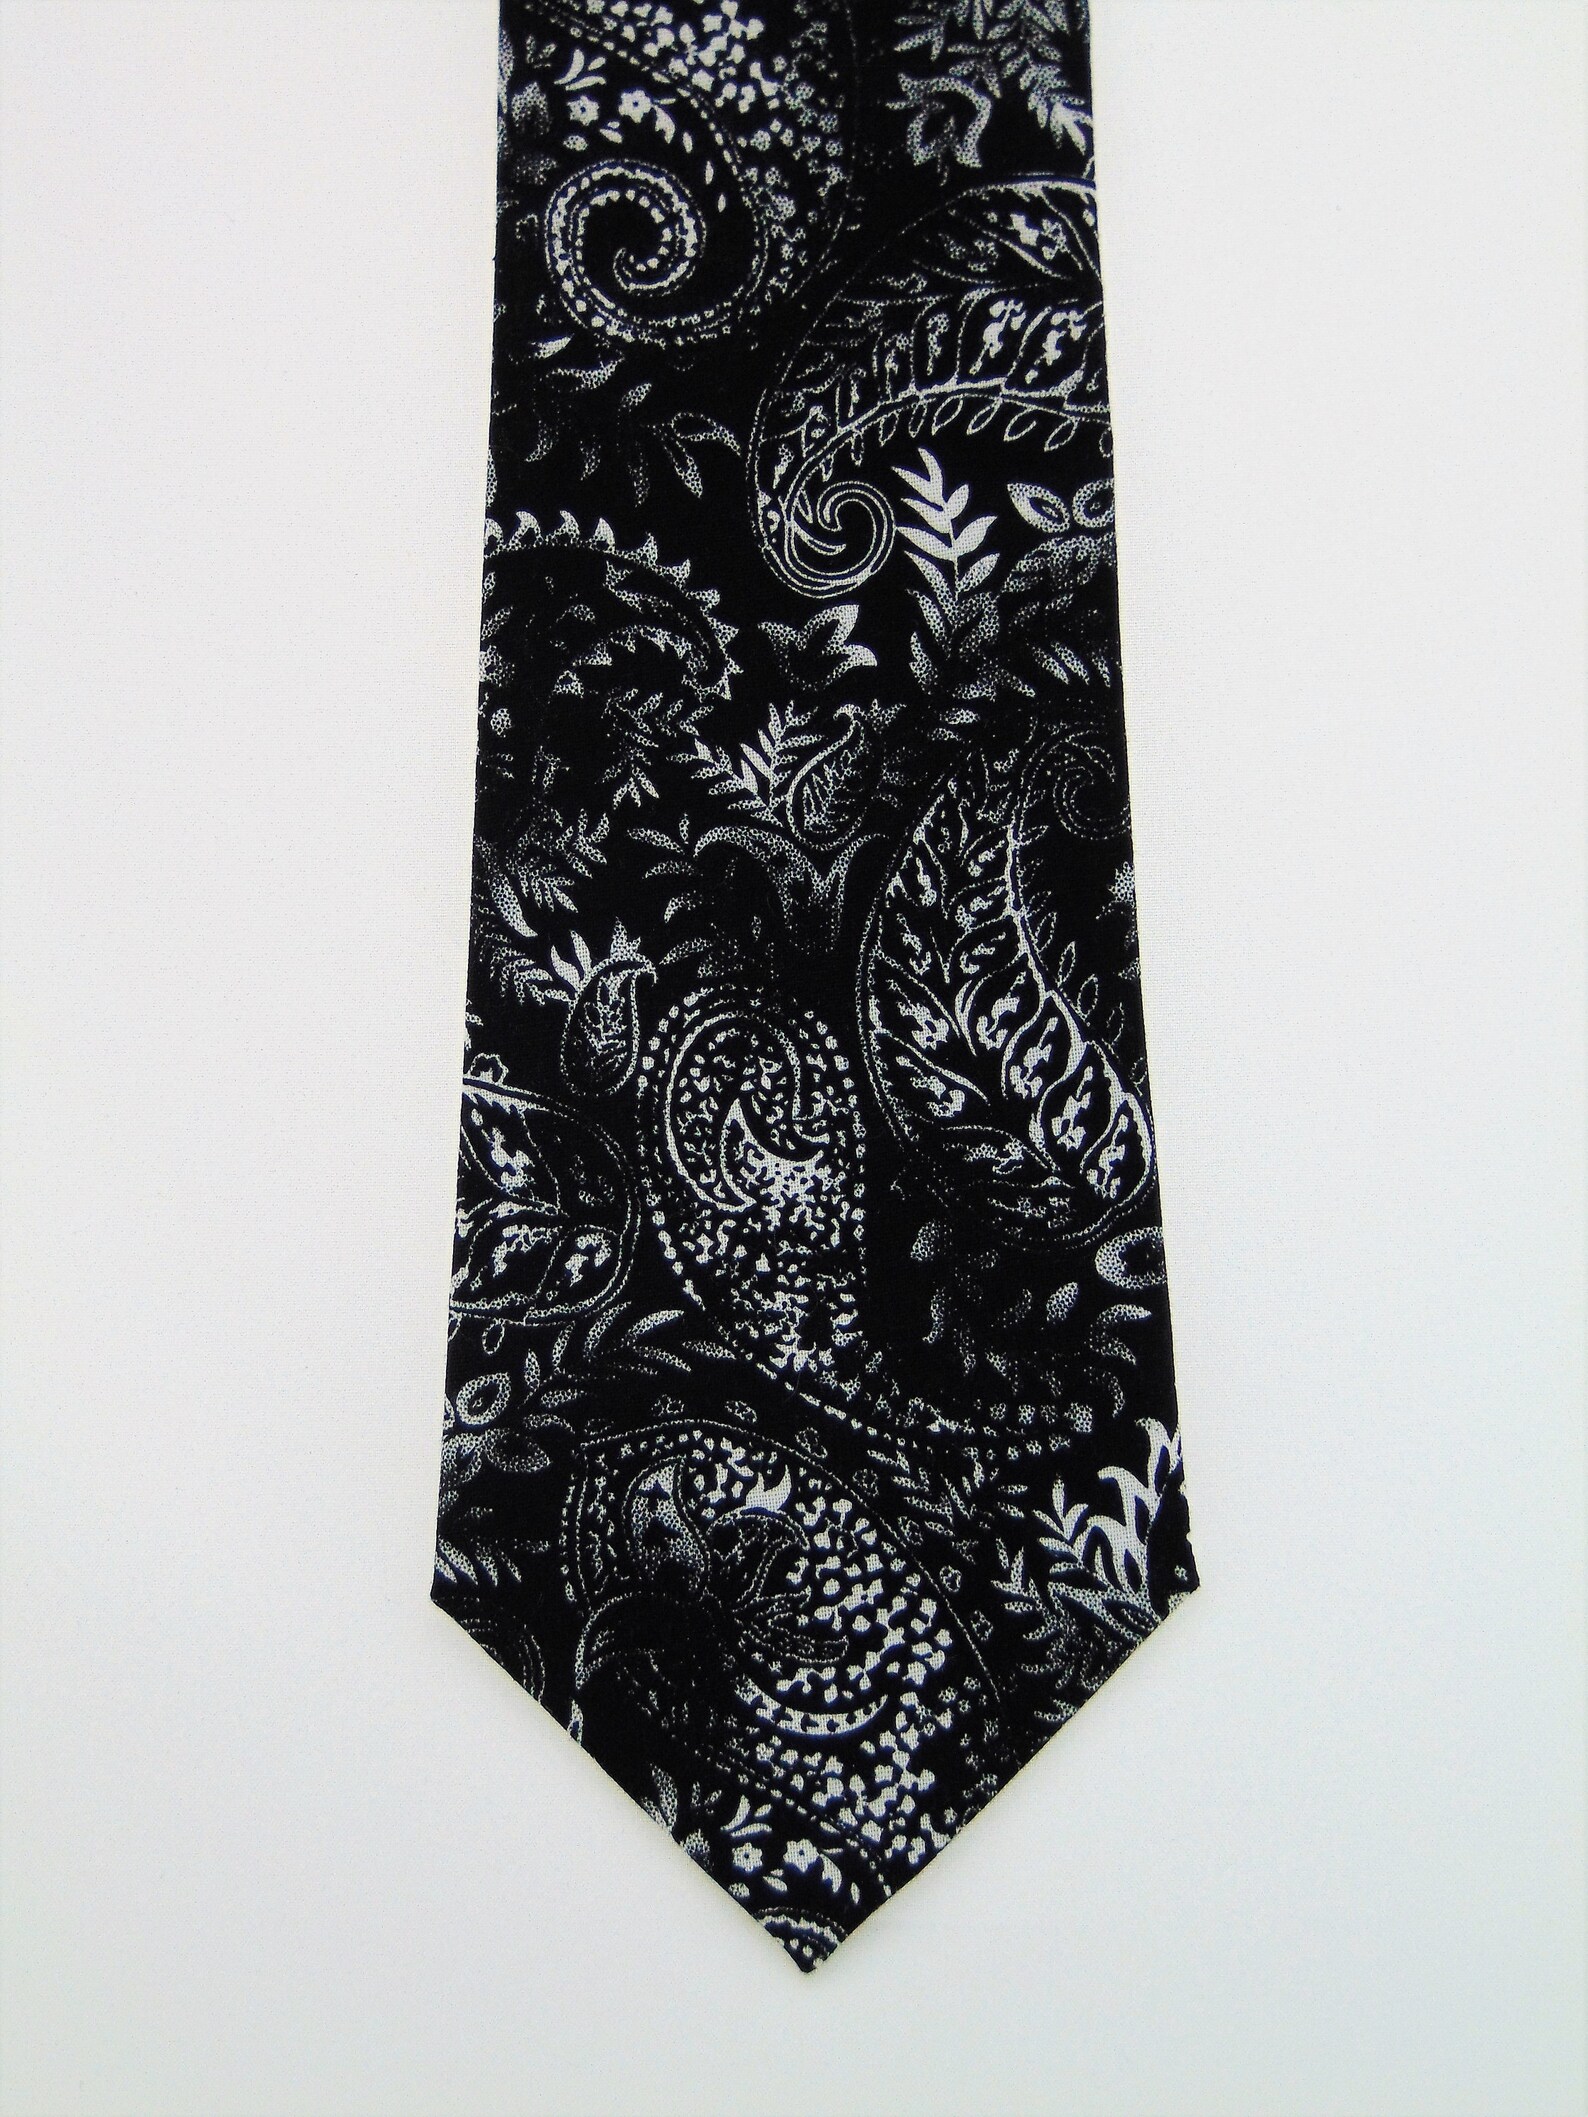 Black Paisley Tie Stylish Mens Tie for White and Black - Etsy